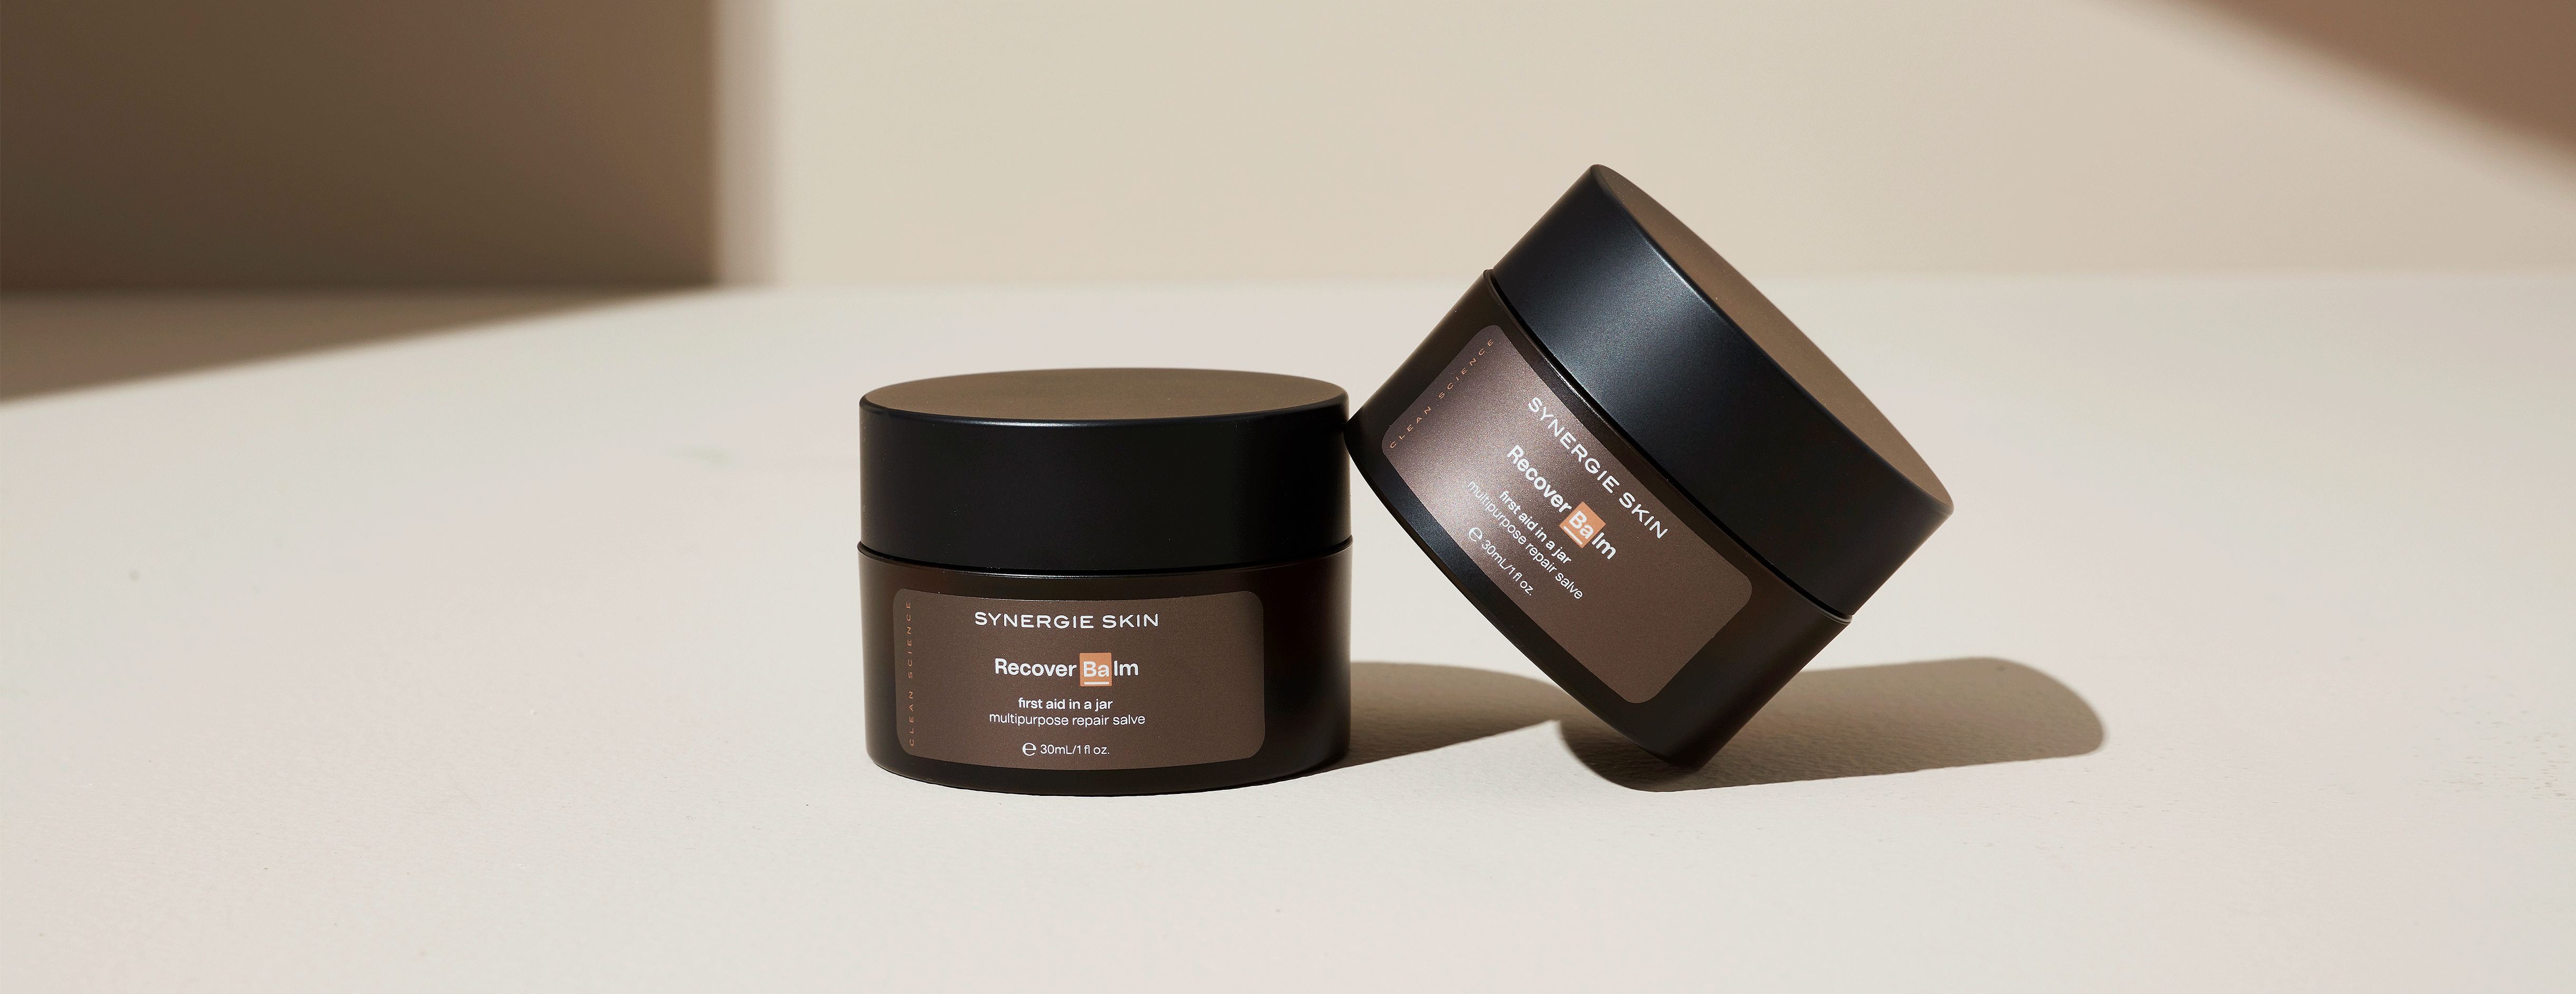 Two Synergie Skin Recover Balm products next to eachother